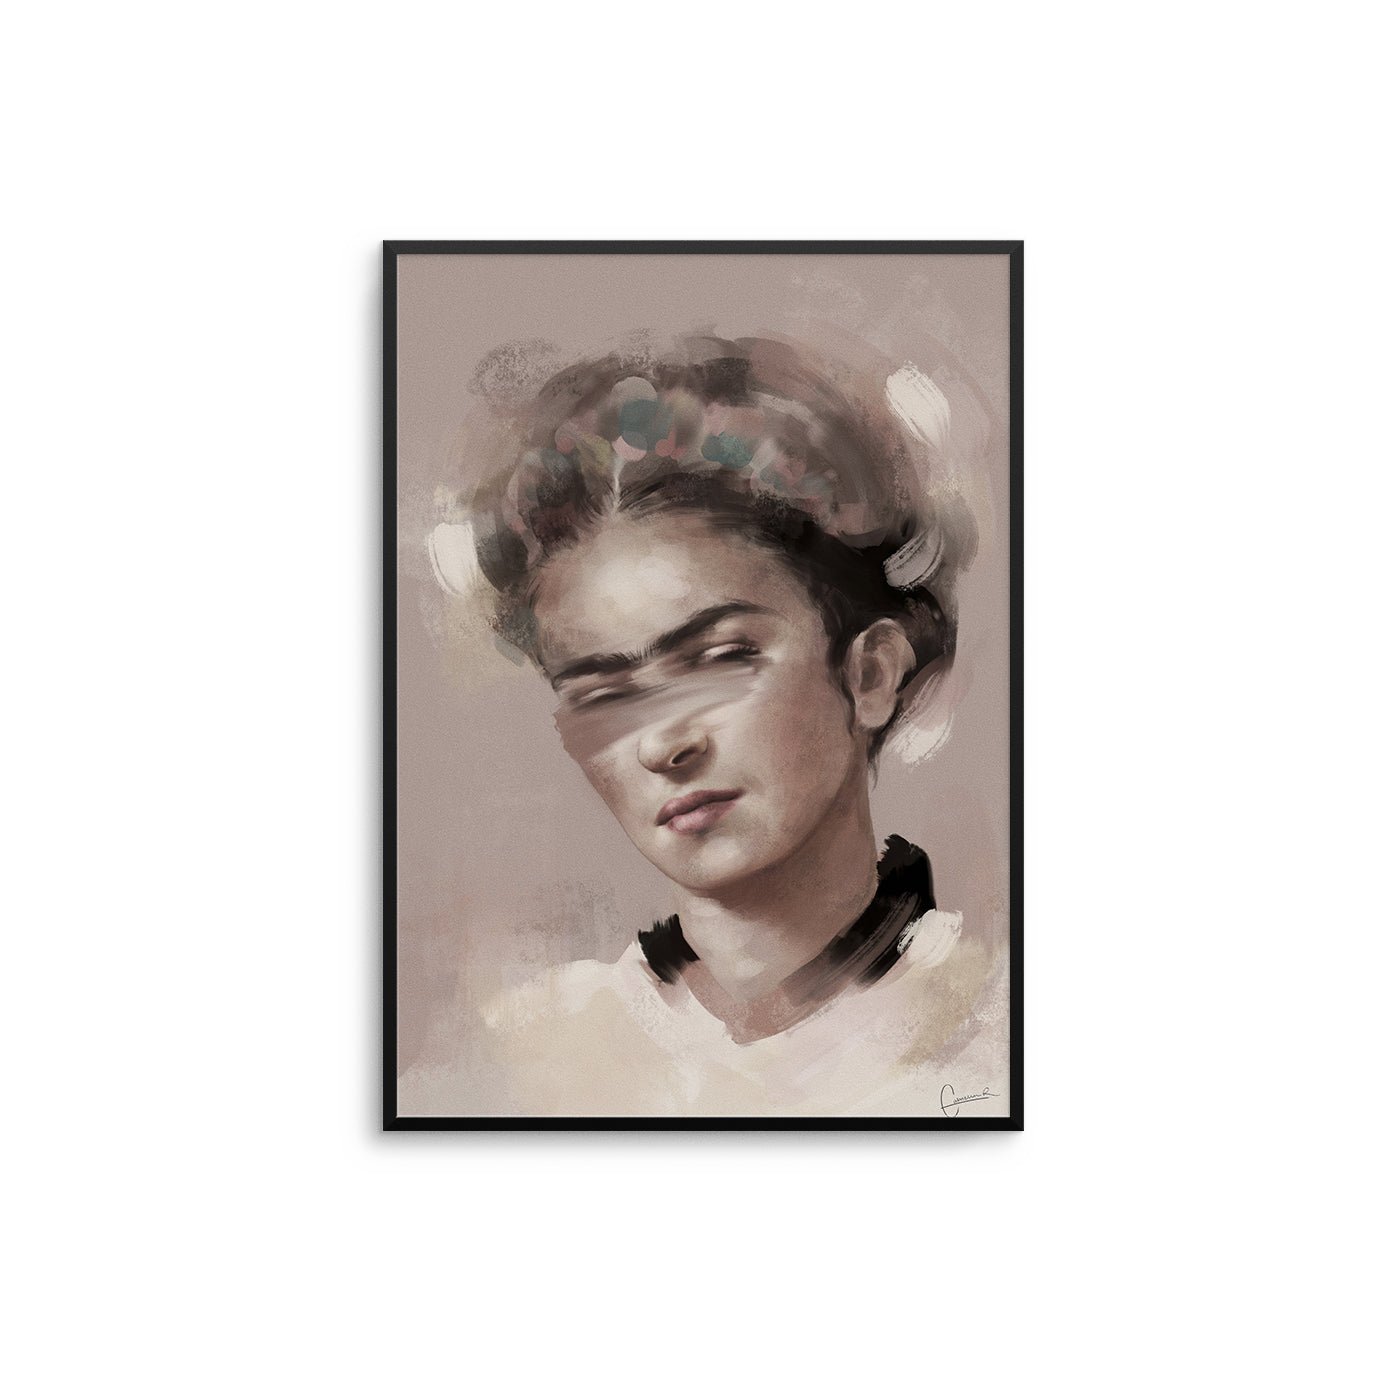 Frida Kahlo Abstract Poster - D'Luxe Prints